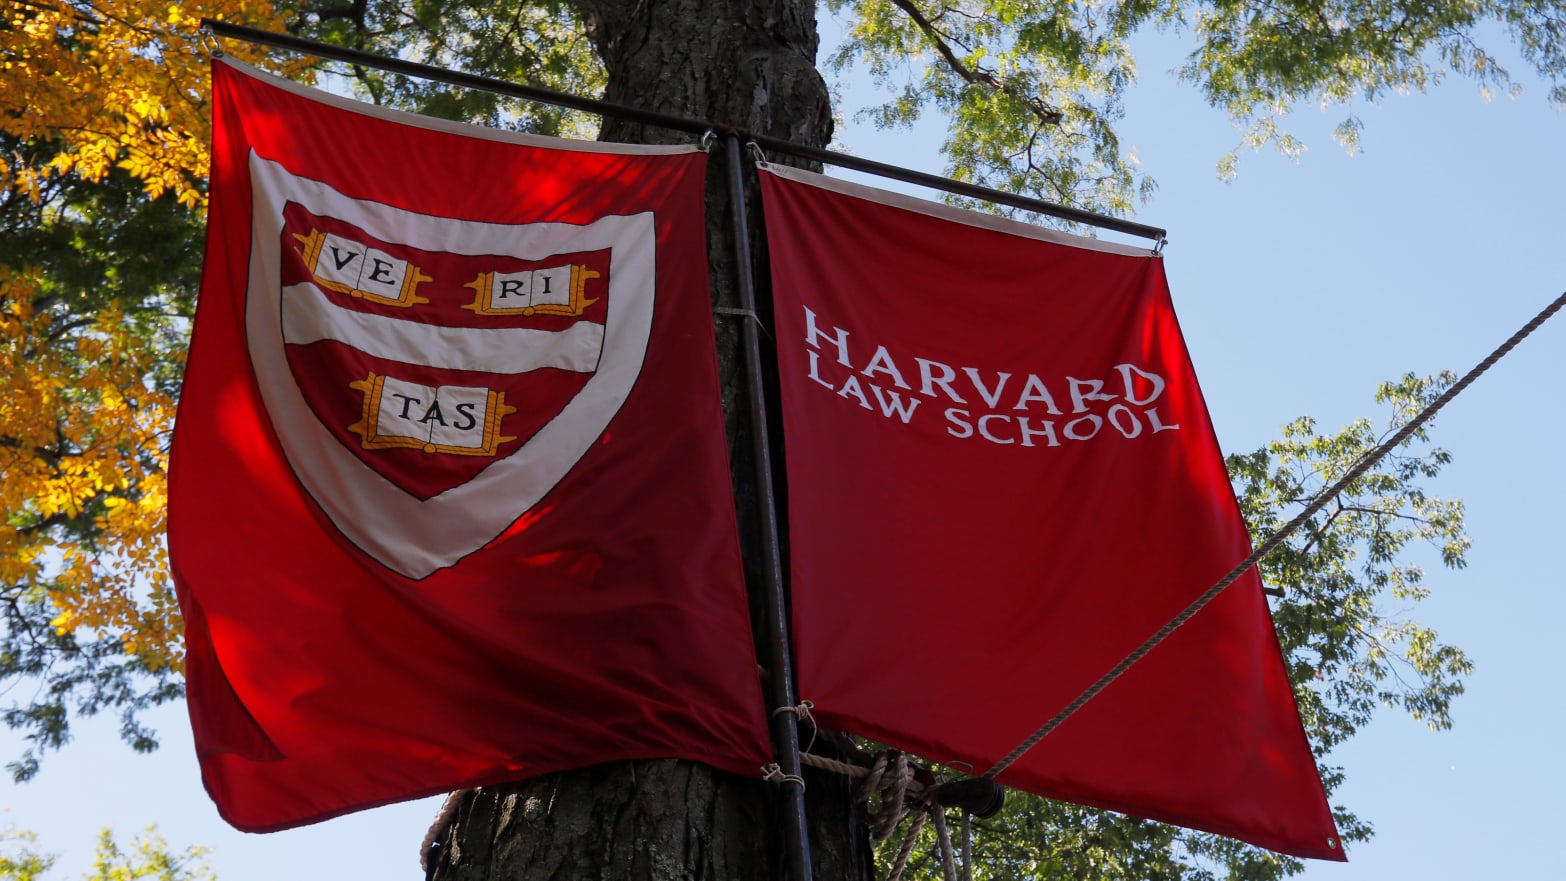 Banners for Harvard Law School fly during the inauguration of Lawrence Bacow as the 29th President of Harvard University in Cambridge